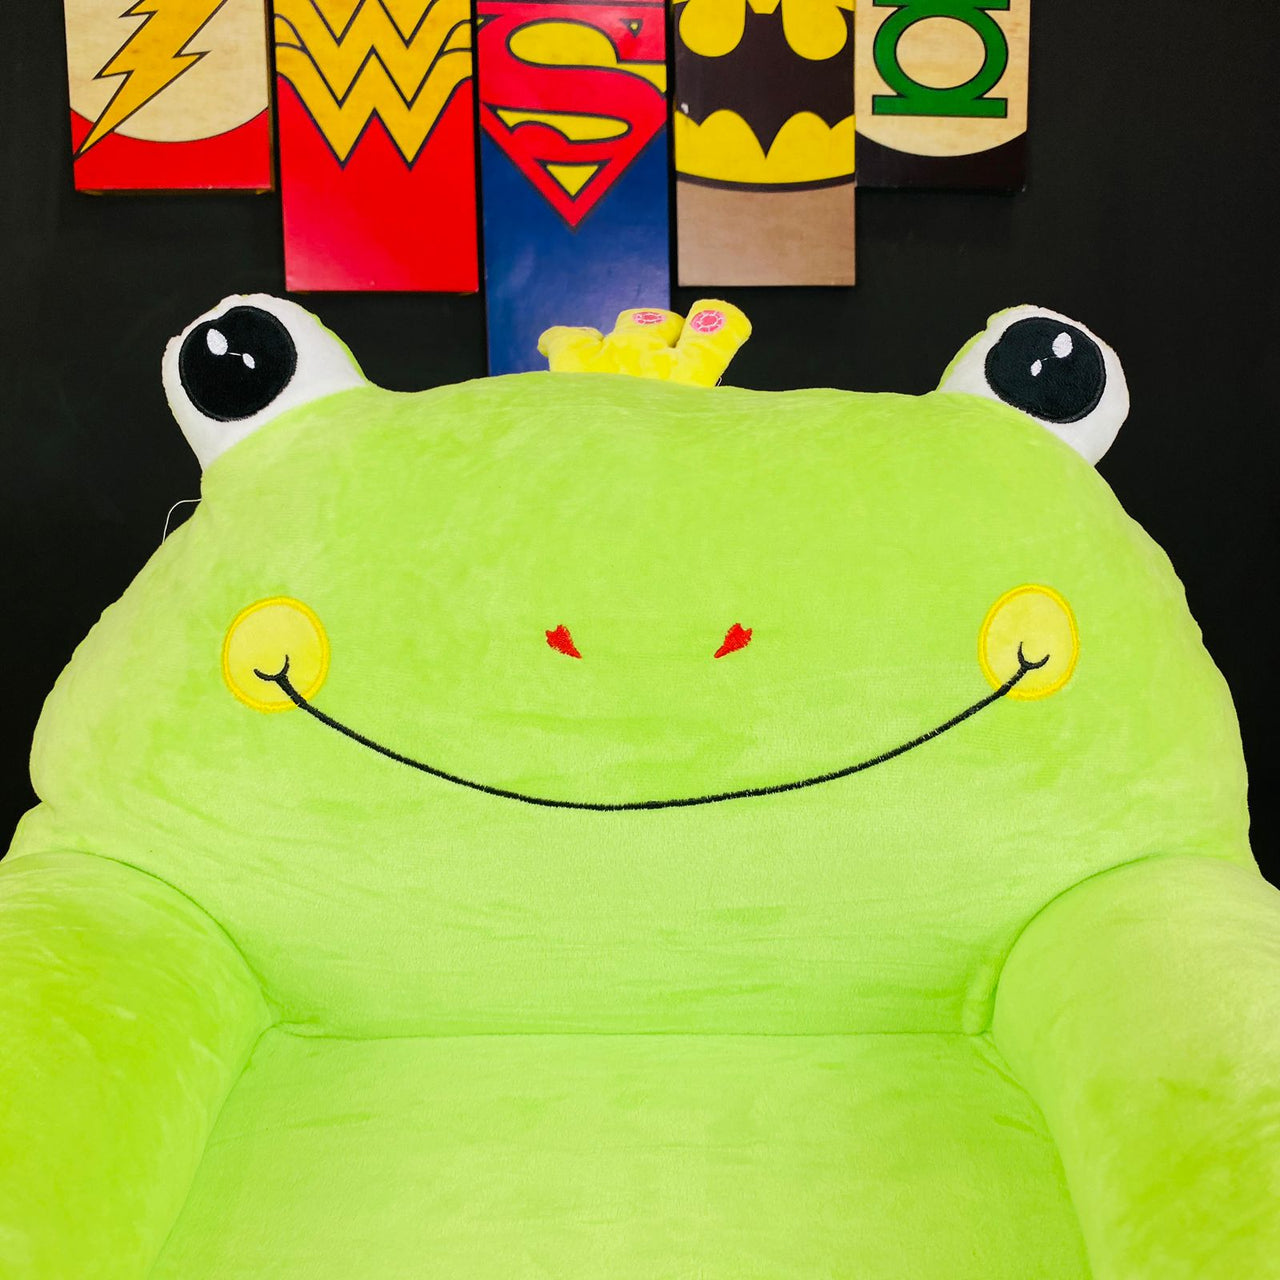 Sofa Seat For Baby In Frog Character